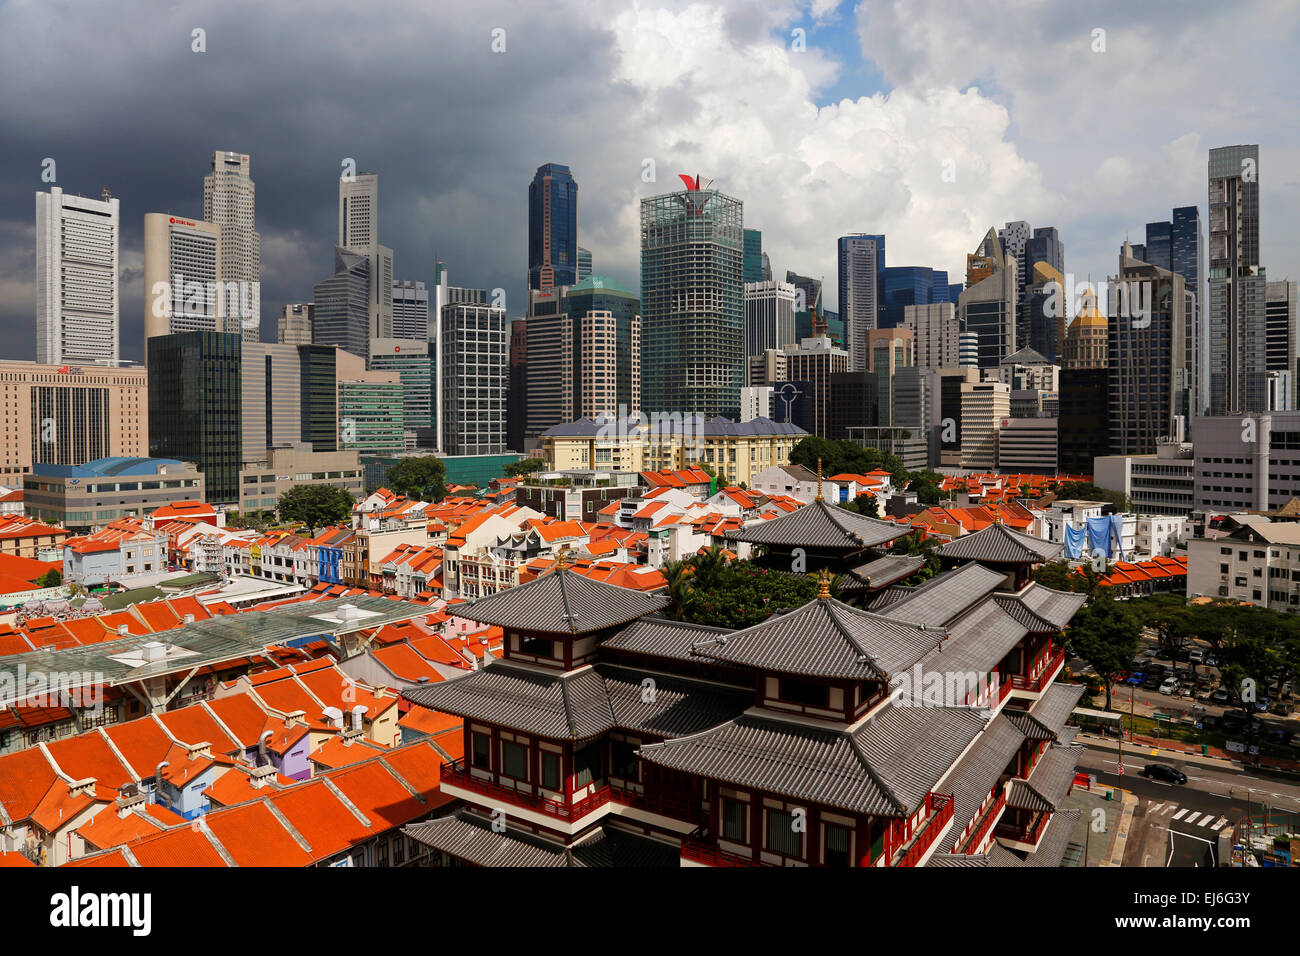 View of Chinatown towards the downtown area of Singapore with the Buddha Tooth Relic Temple and Museum in the foreground Stock Photo